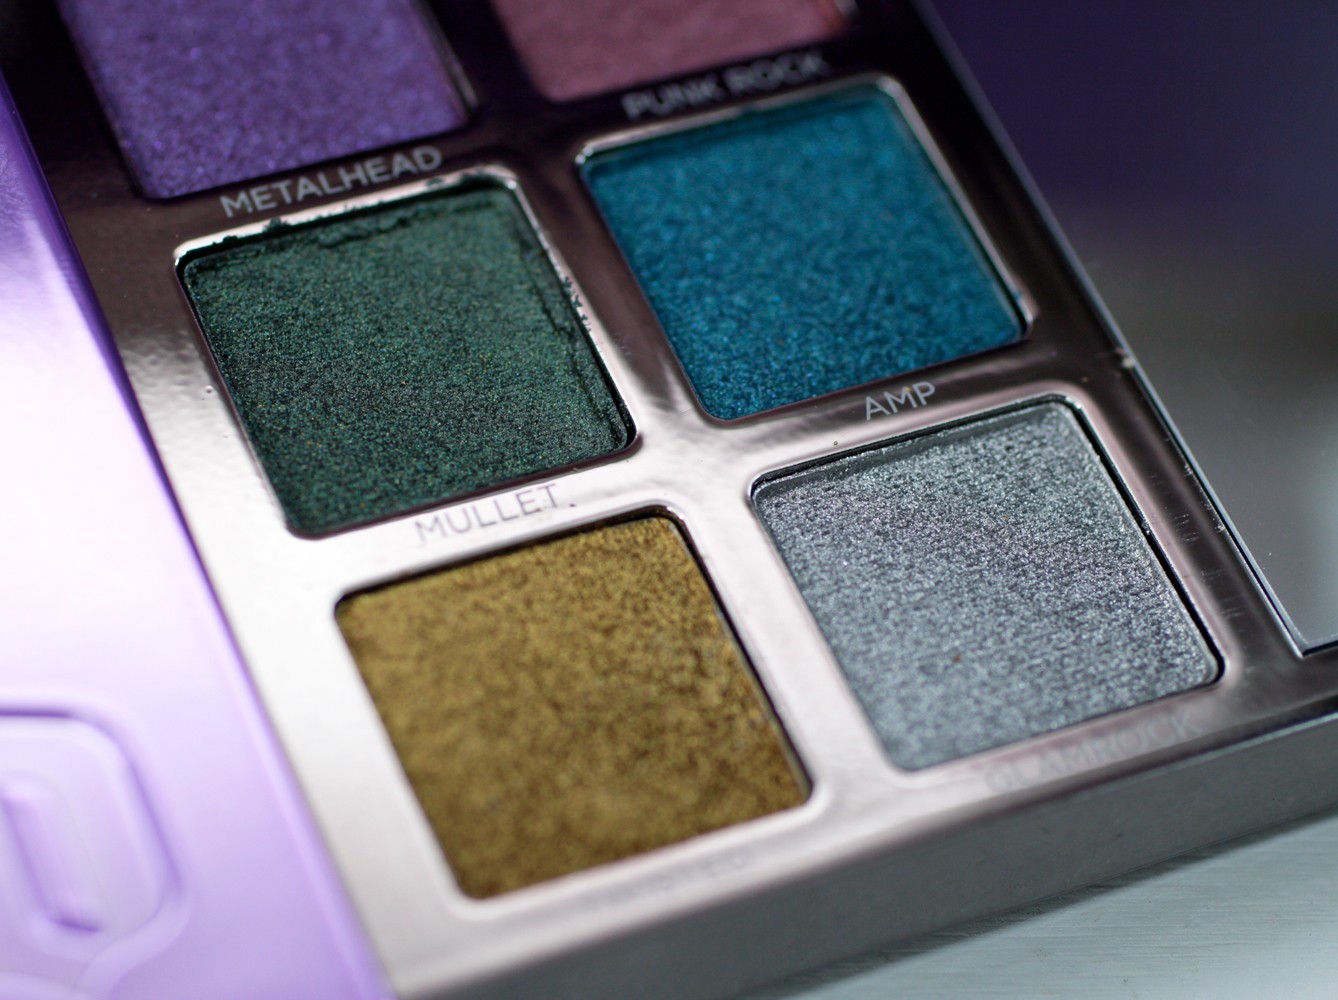 Urban Decay Heavy Metals Eyeshadow Palette - Mullet, Amp, Twisted, Glamrock - Urban Decay Heavy Metals Palette review by popular Los Angeles cruelty free beauty blogger My Beauty Bunny